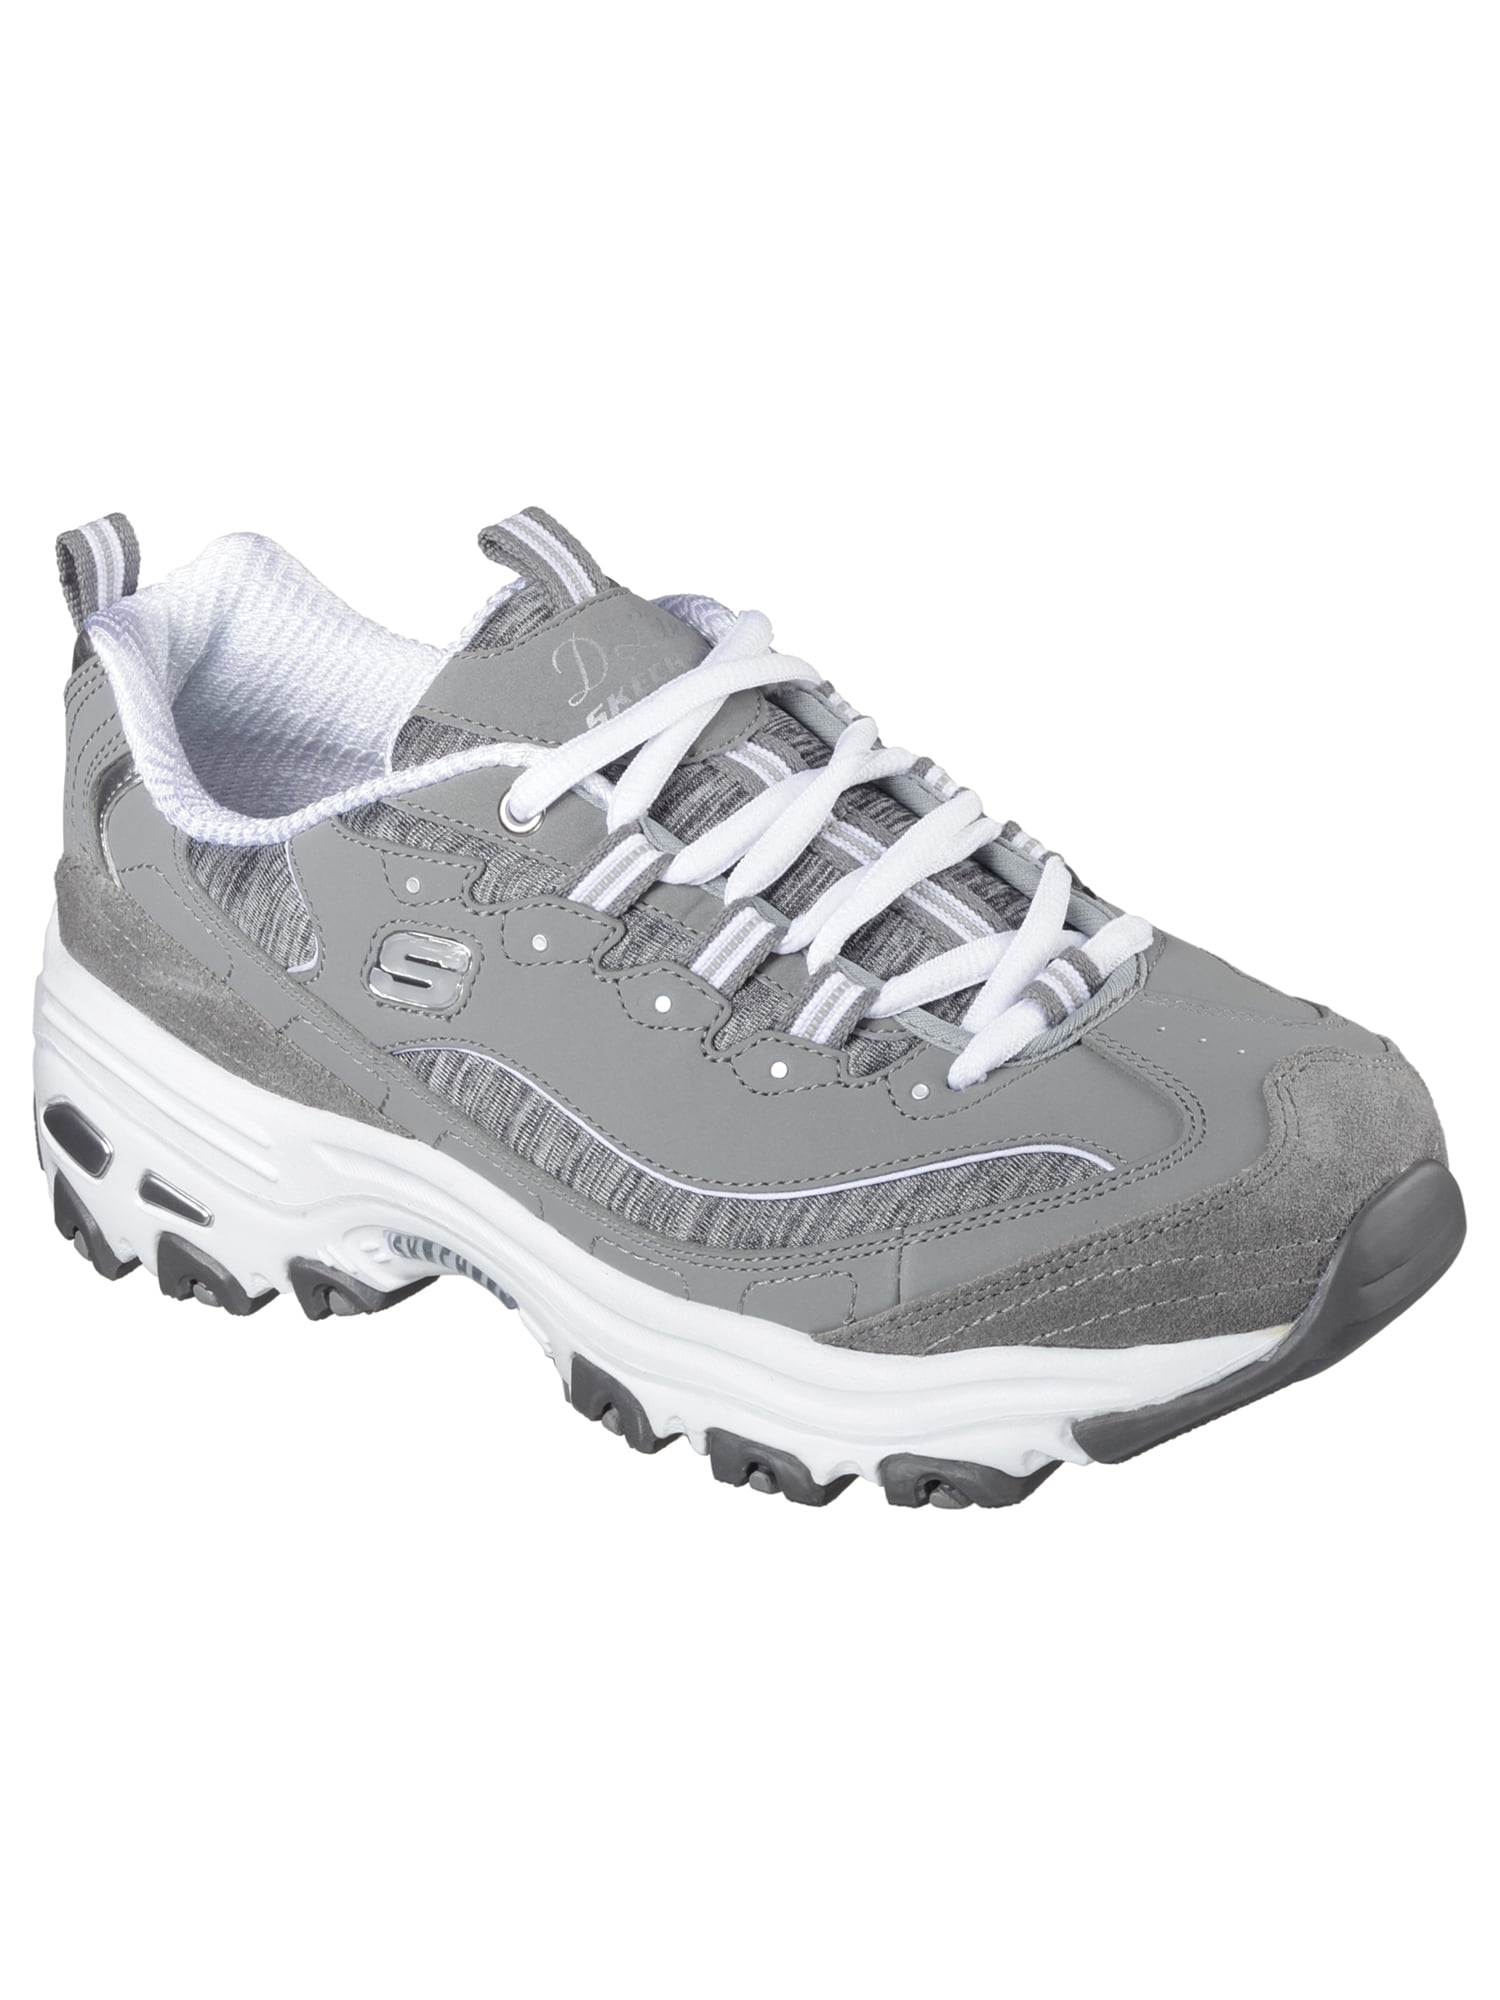 Skechers Women's Sport Me Time Lace-up Athletic Sneaker, Wide Width Available - Walmart.com